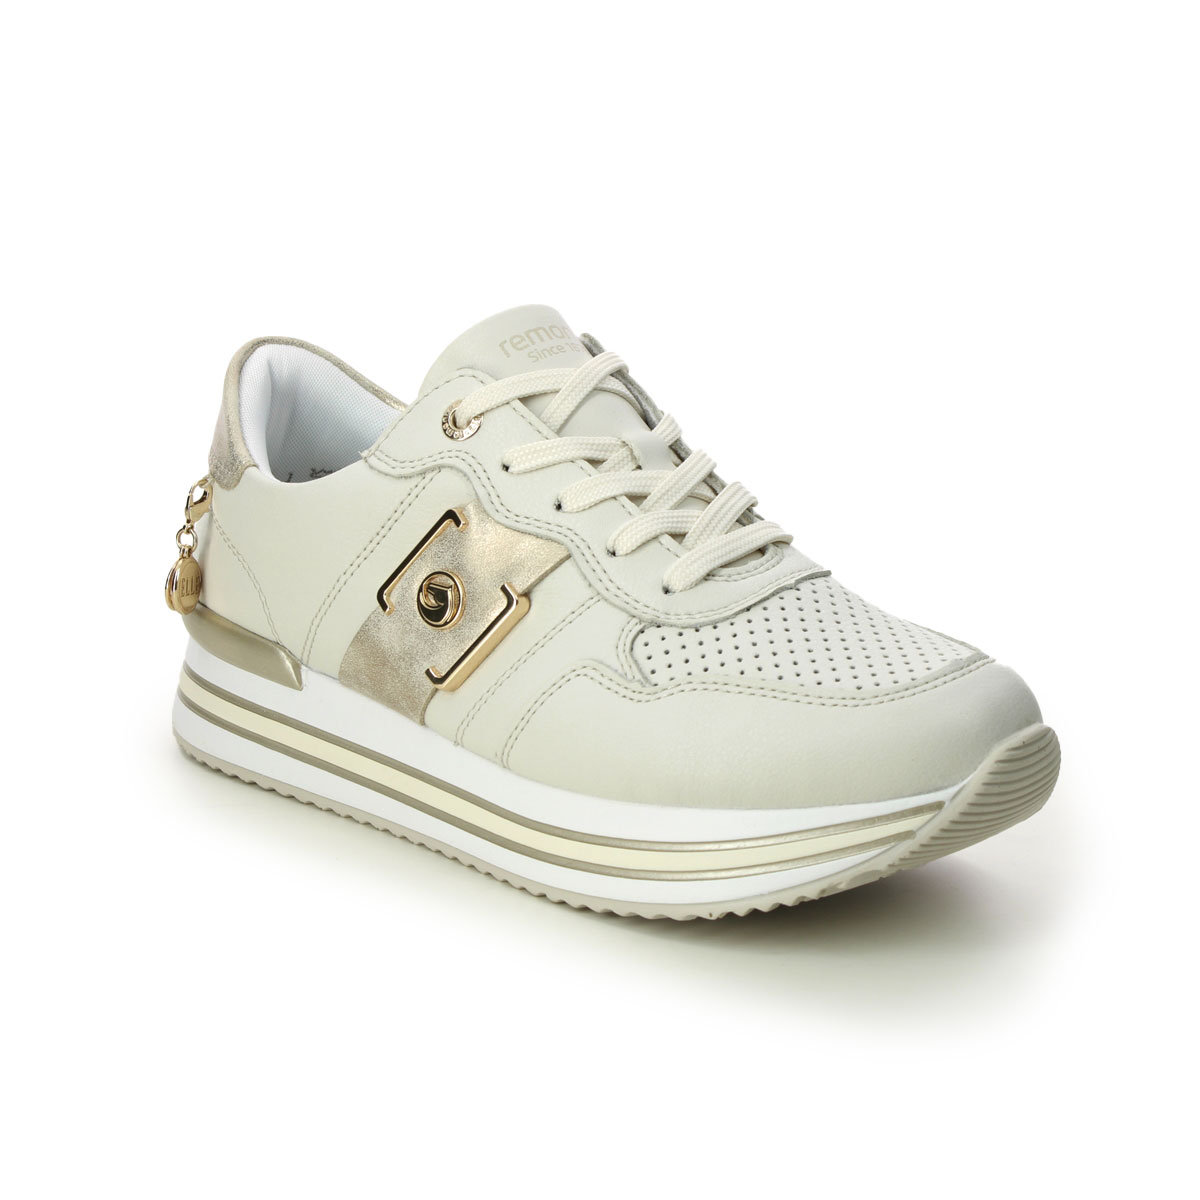 Remonte D1322-60 Ranger Elle Off White Womens trainers in a Plain Leather in Size 38